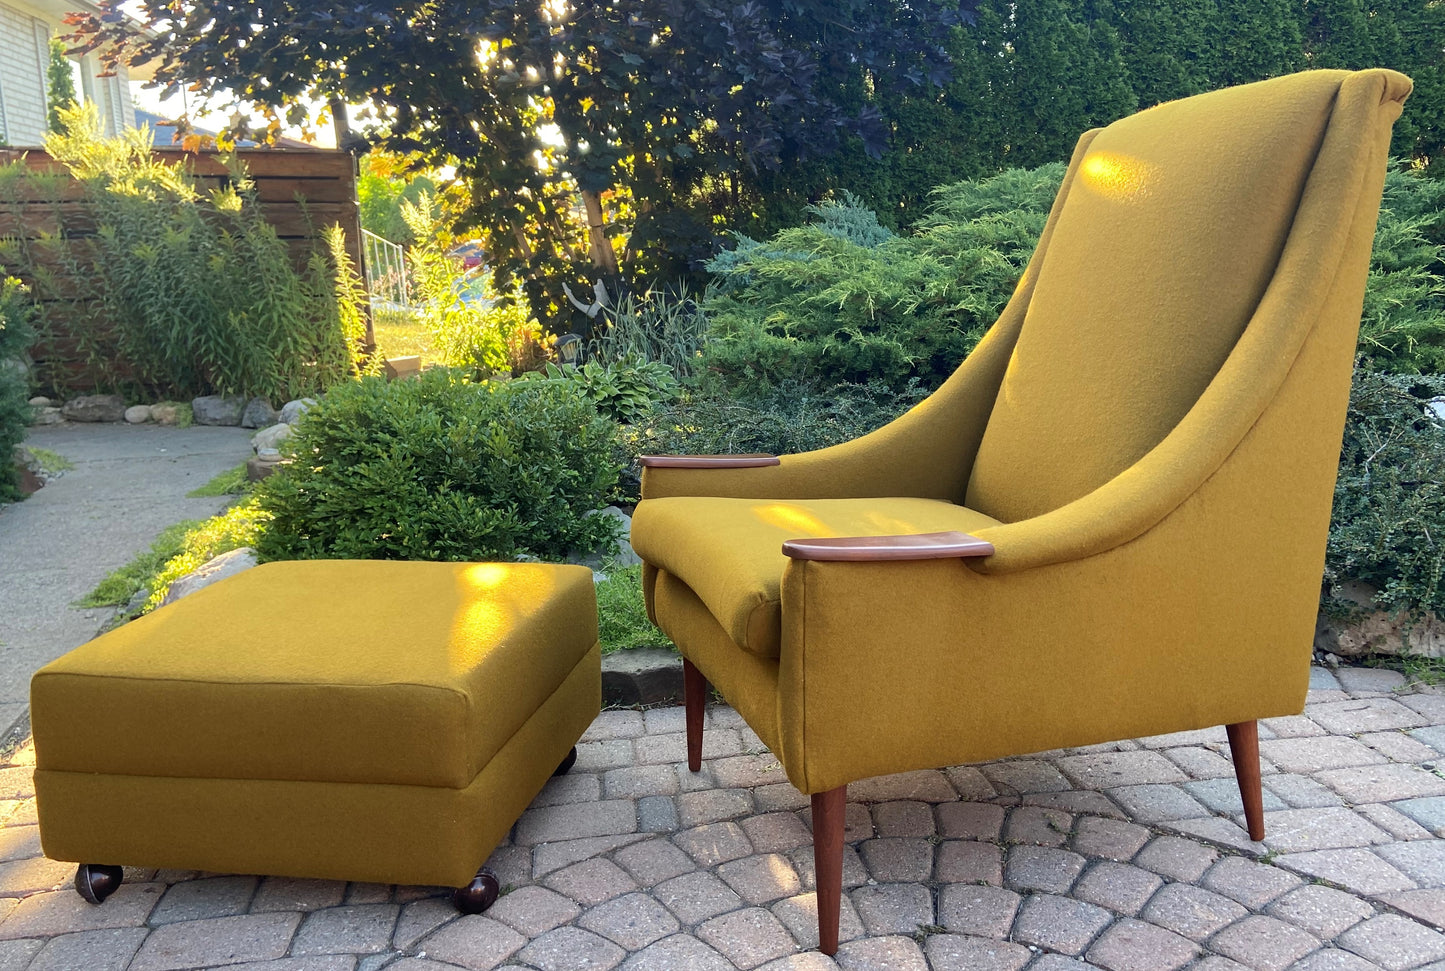 REFINISHED REUPHOLSTERED Mid Century Modern armchair & ottoman